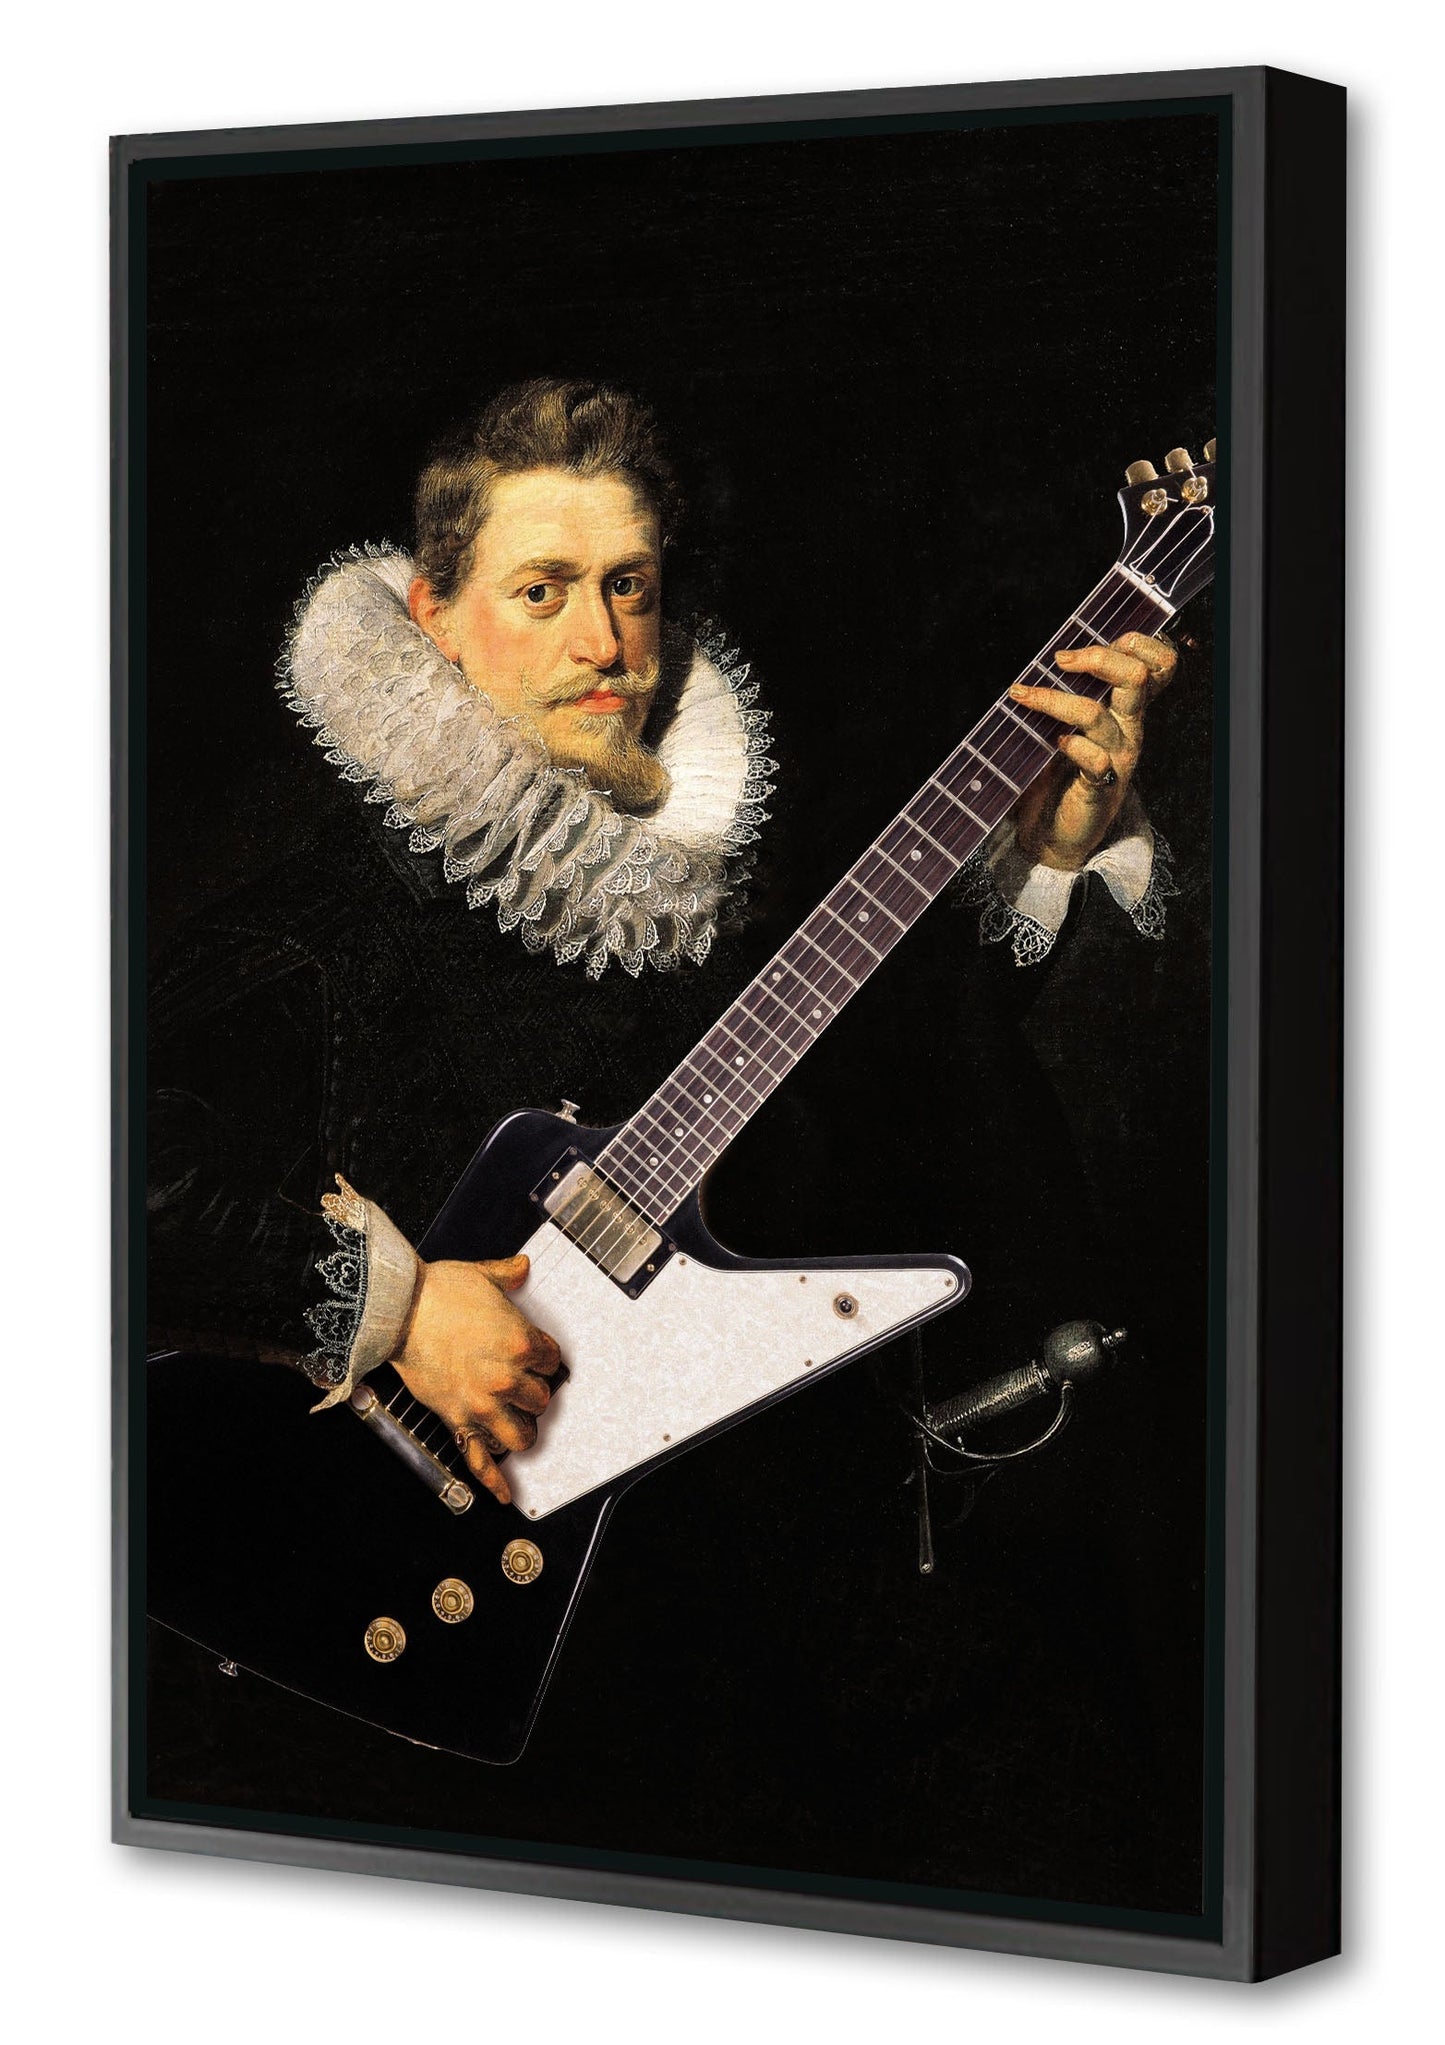 Guitare 3-historical, print-Canvas Print with Box Frame-40 x 60 cm-BLUE SHAKER